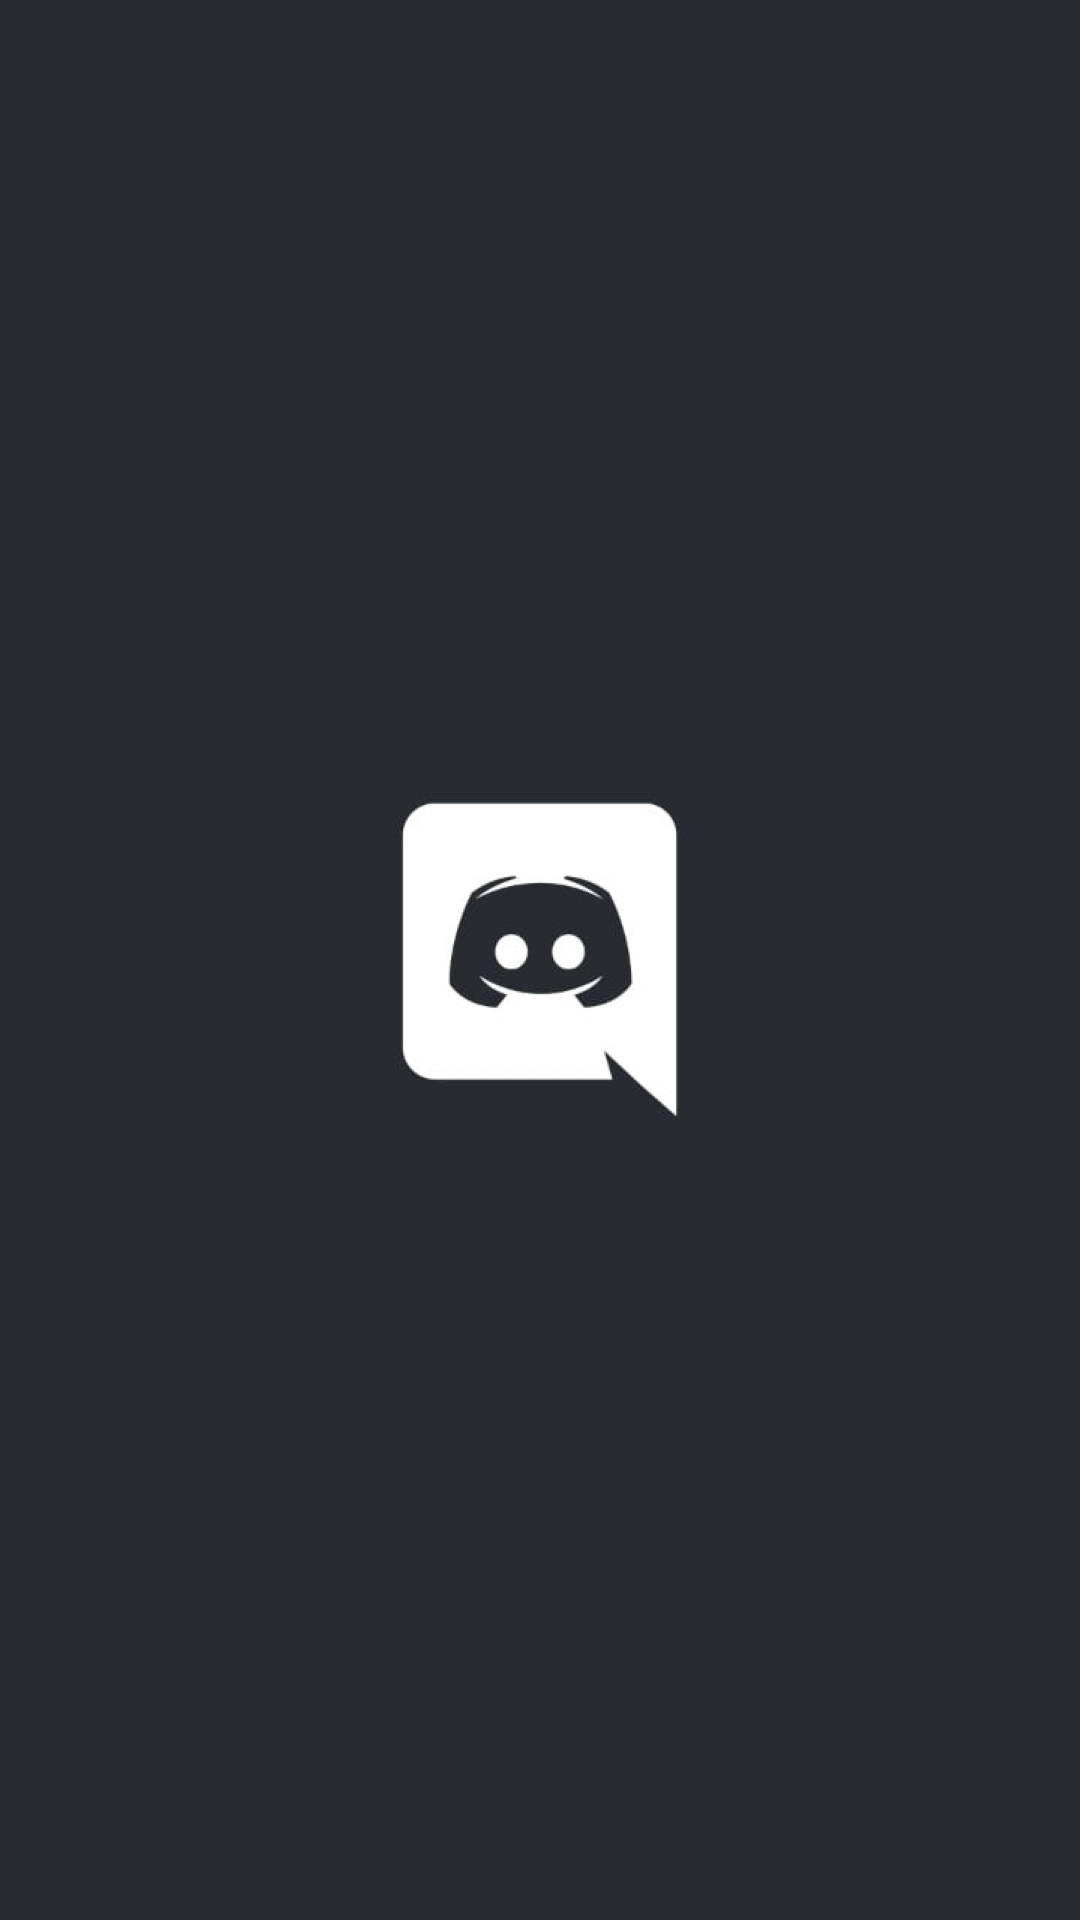 Discord 1080X1920 Wallpaper and Background Image